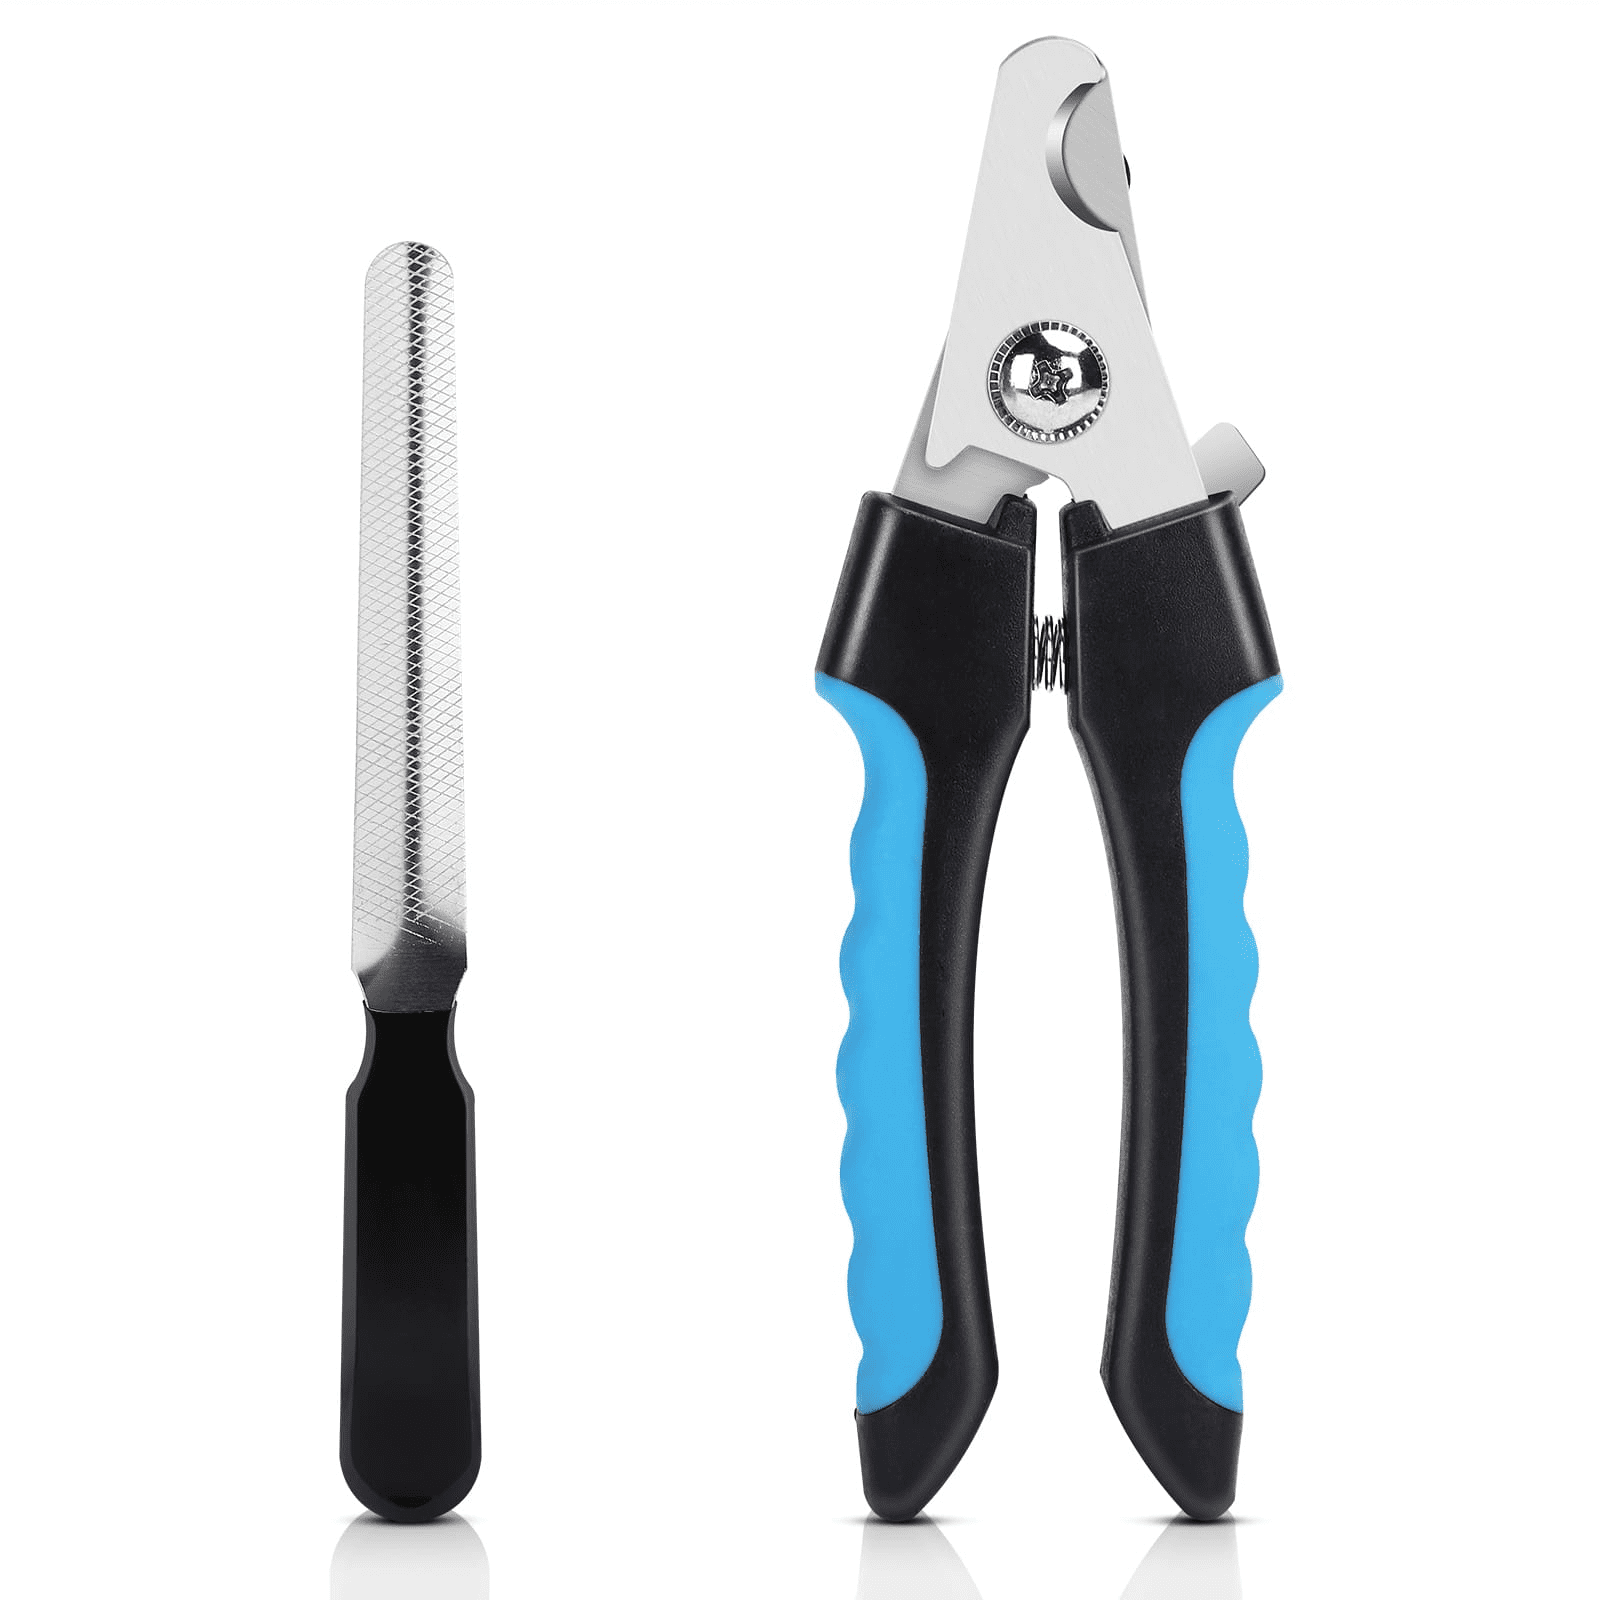 Long Handled Toenail Clippers Scissors + Nails File, for Men Women Elderly  for Thick Nails Pedicure Tool Set : Amazon.co.uk: Beauty